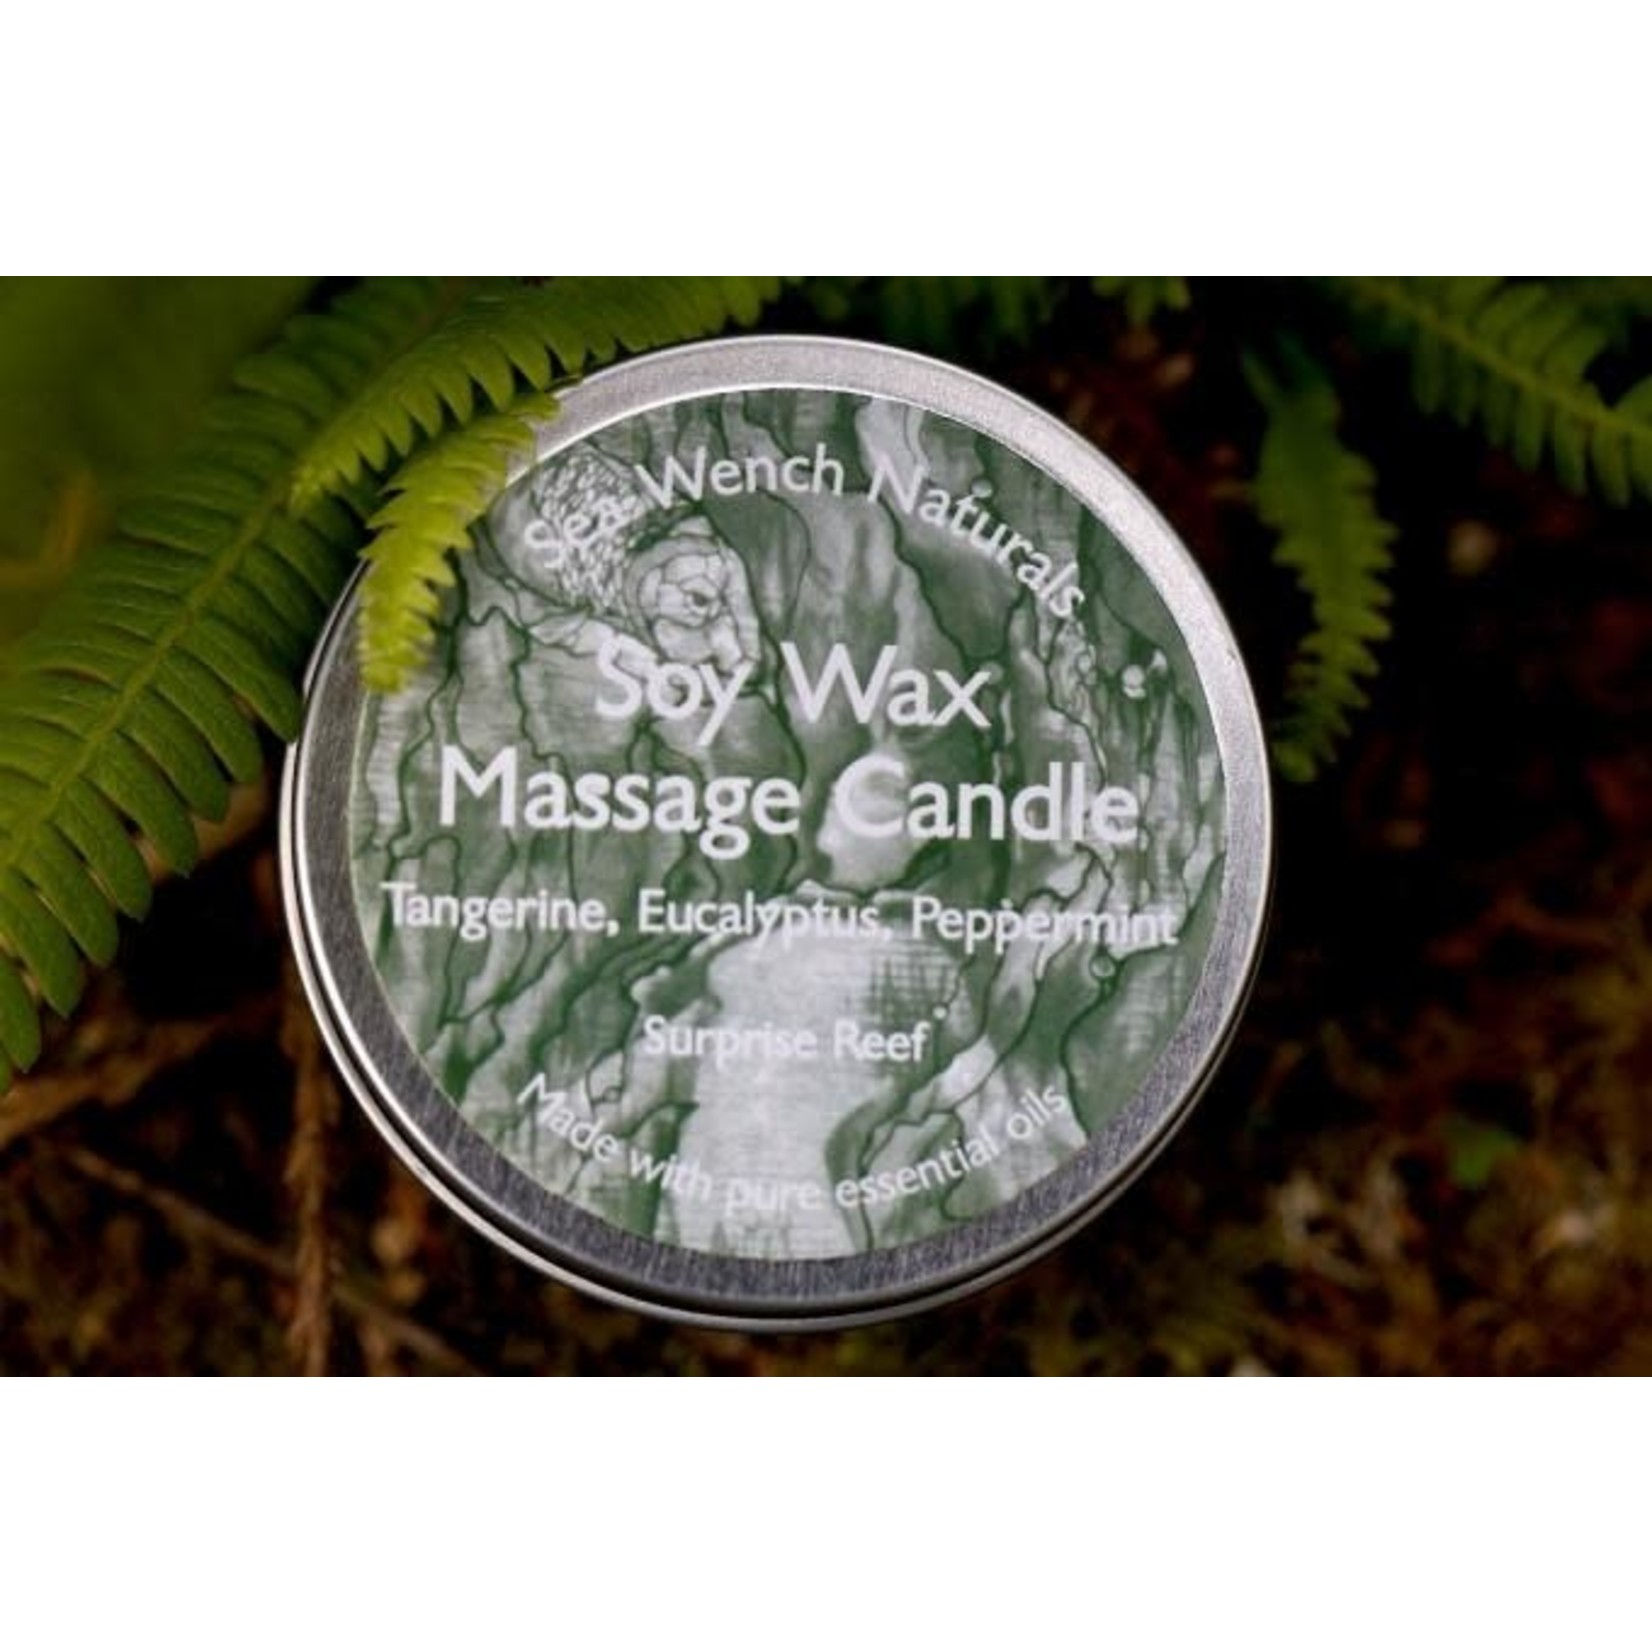 Sea Wench Soy Wax Massage Candle - Surprise Reef